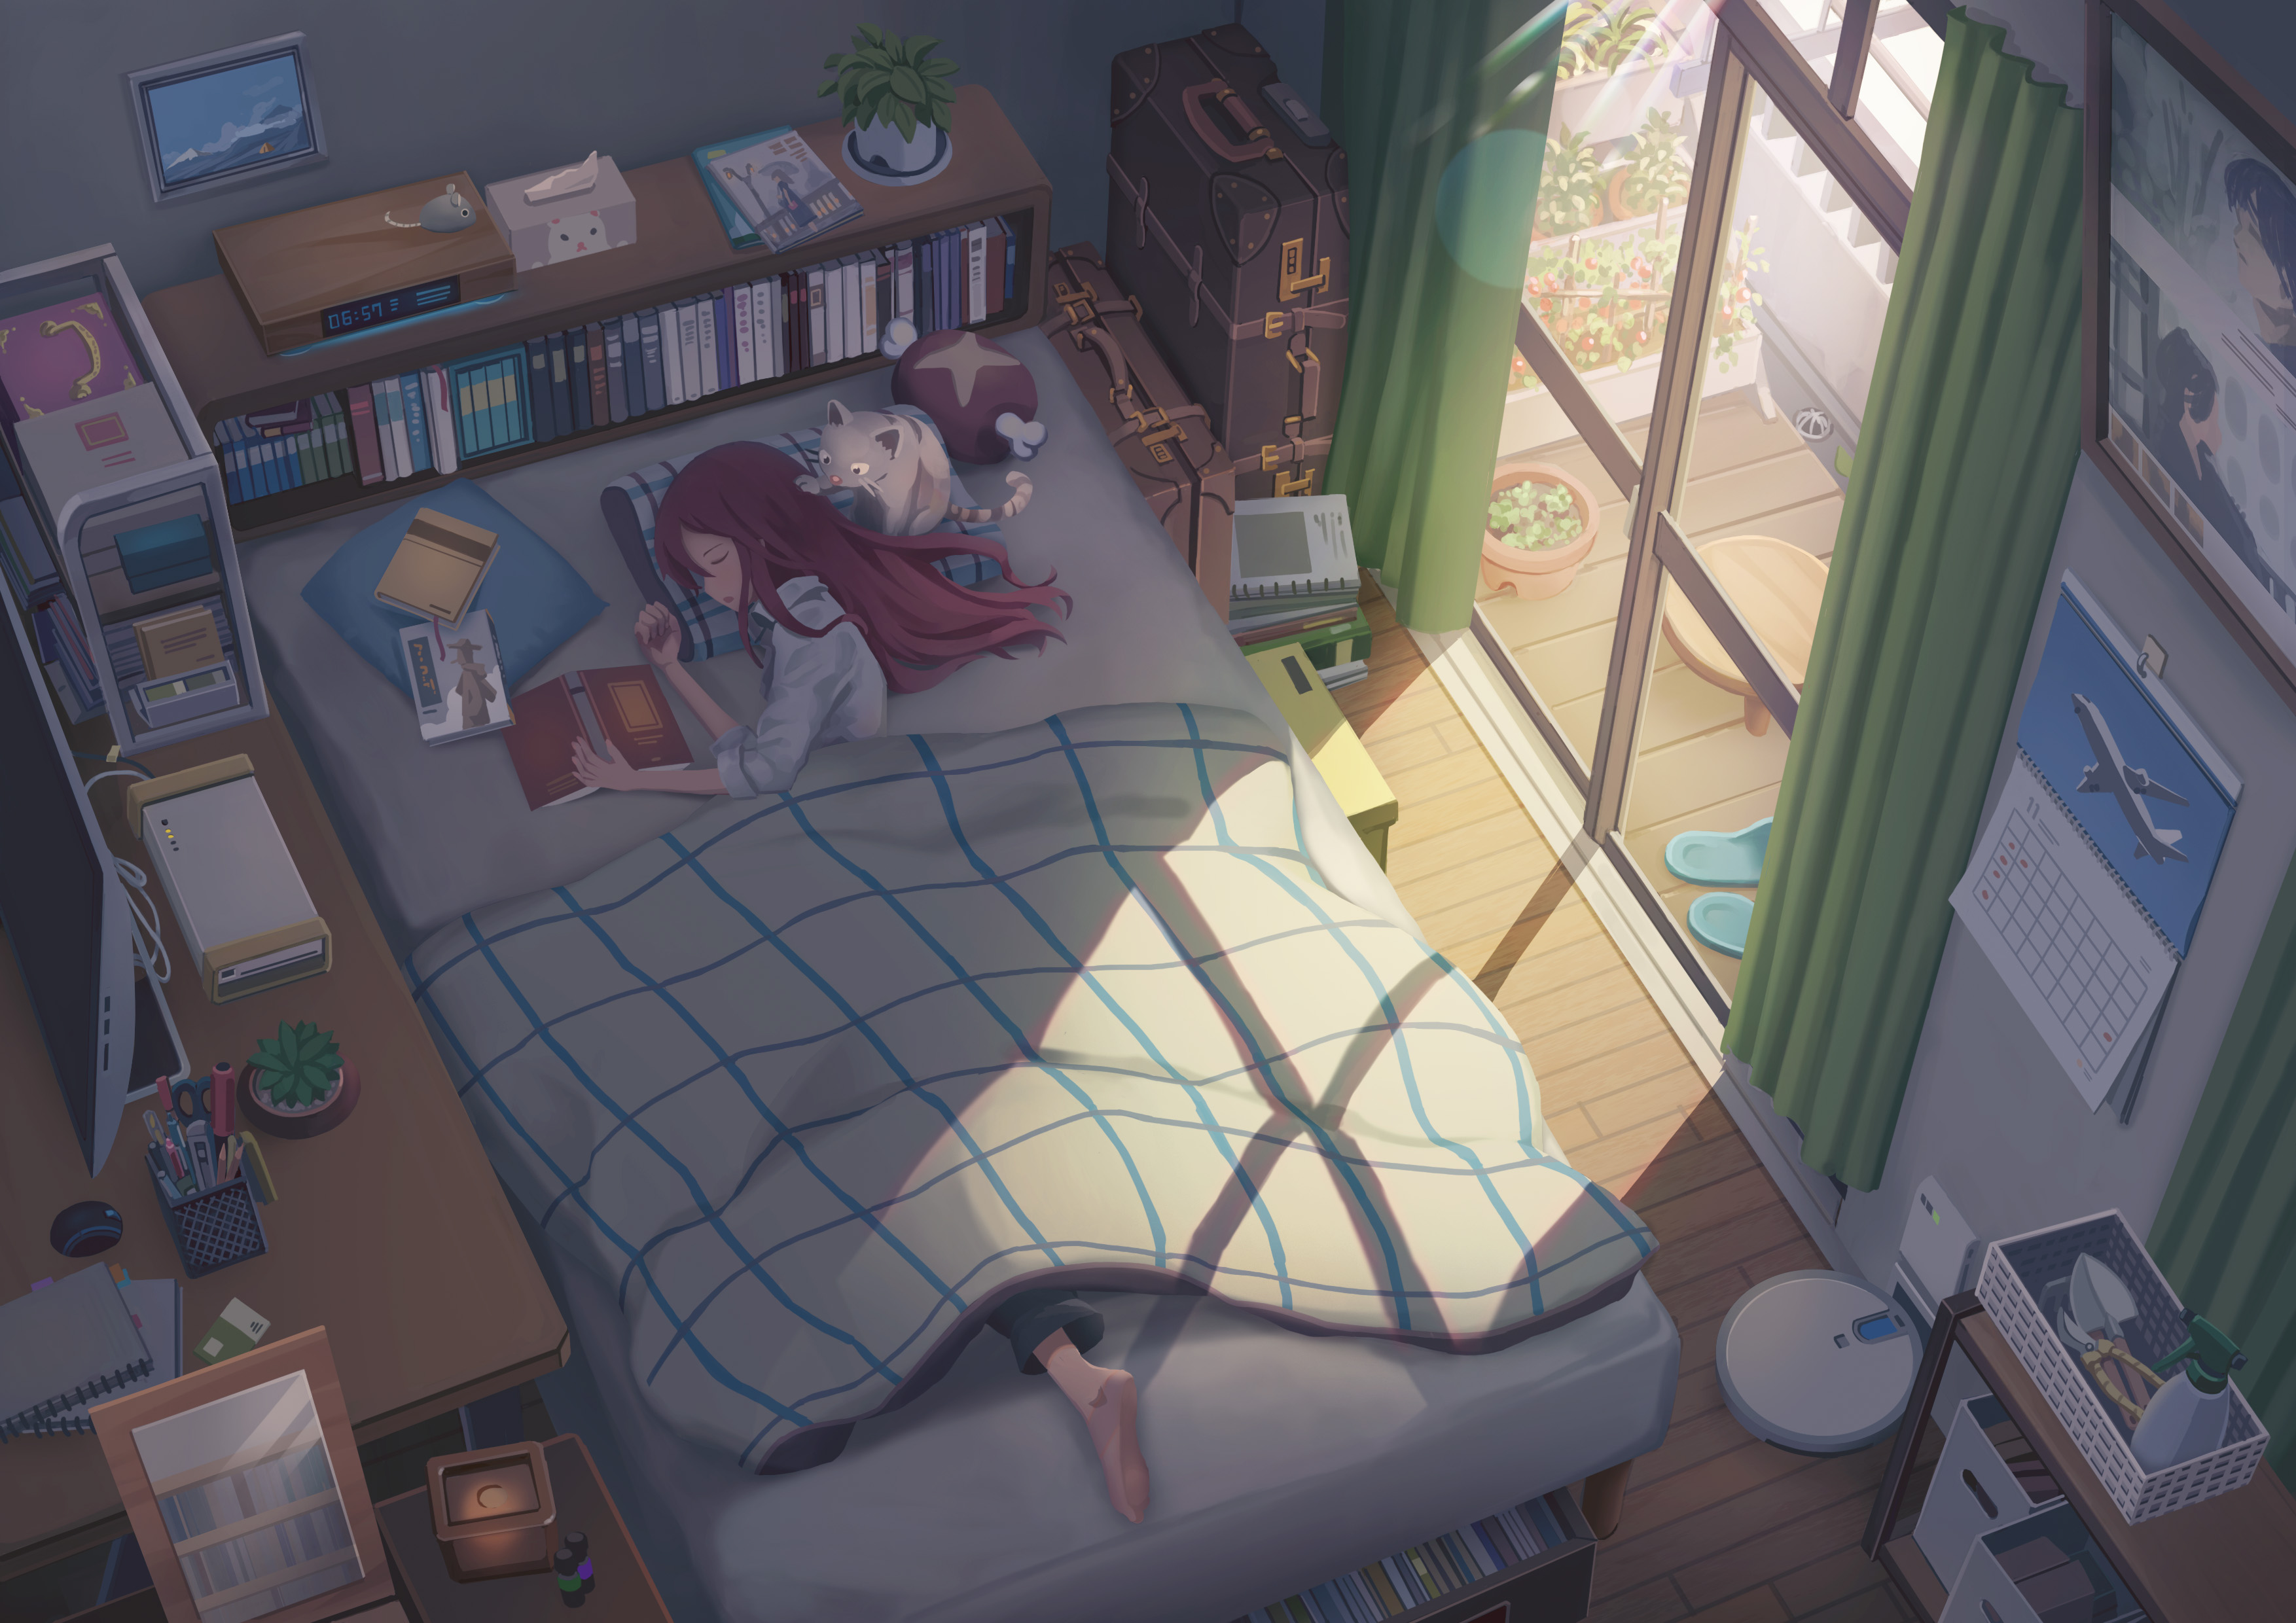 Anime 3508x2480 anime girls women cats room interior in bed digital art mirror calendar mouse toy tissues plants underbed storage picture frames Gatos anime animals mammals